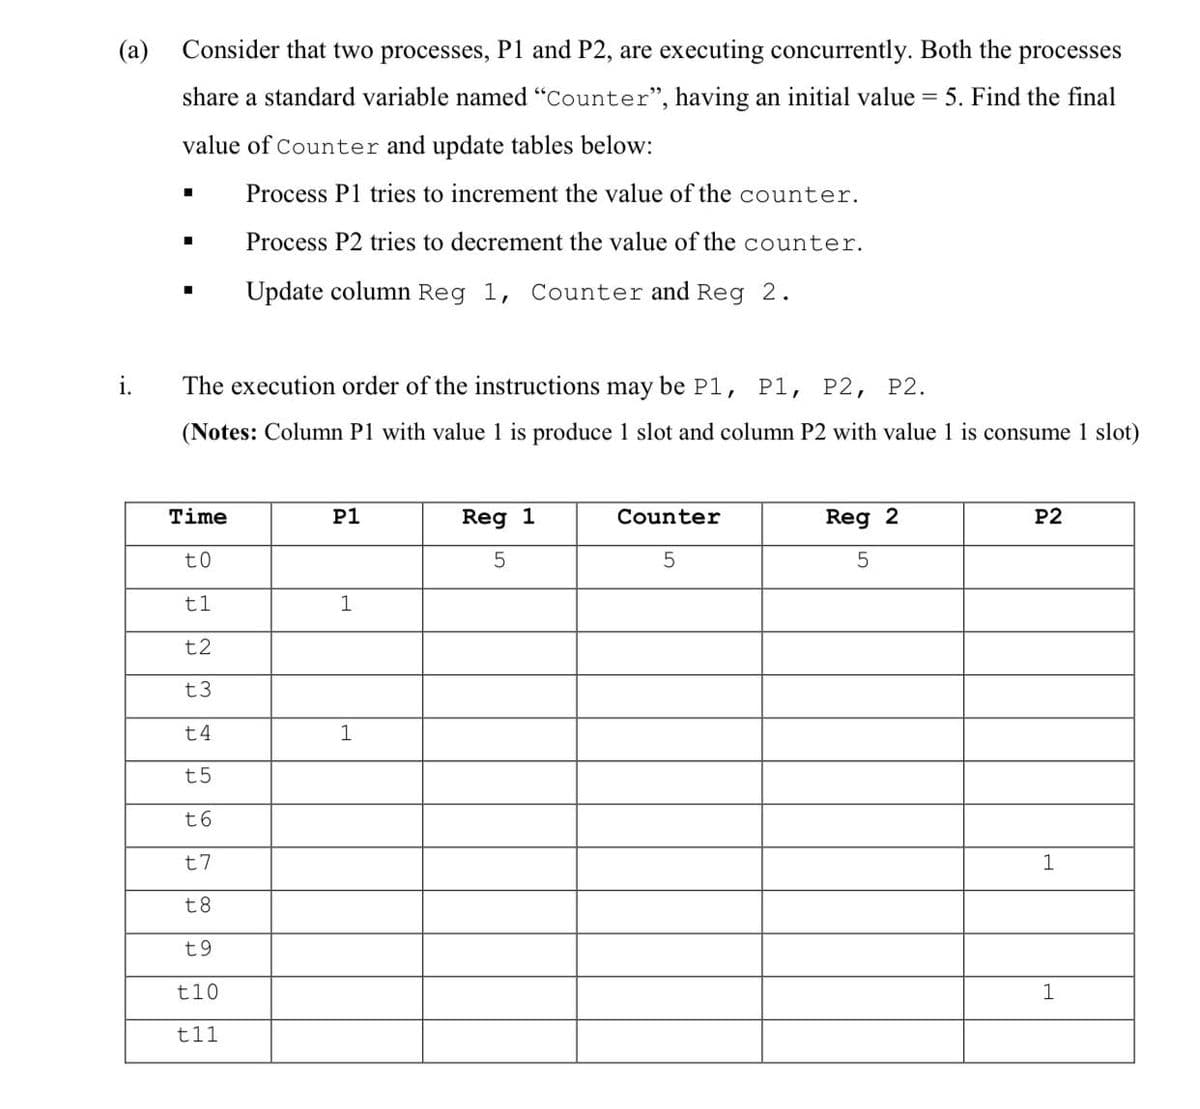 (a)
Consider that two processes, P1 and P2, are executing concurrently. Both the processes
share a standard variable named "Counter", having an initial value = 5. Find the final
value of Counter and update tables below:
Process P1 tries to increment the value of the counter.
Process P2 tries to decrement the value of the counter.
Update column Reg 1, Counter and Reg 2.
The execution order of the instructions may be P1, P1, P2, P2.
(Notes: Column P1 with value 1 is produce 1 slot and column P2 with value 1 is consume 1 slot)
Time
to
tl
t2
t3
t4
t5
t6
t7
t8
t9
t10
t11
P1
1
1
Reg 1
5
Counter
5
Reg 2
5
P2
1
1